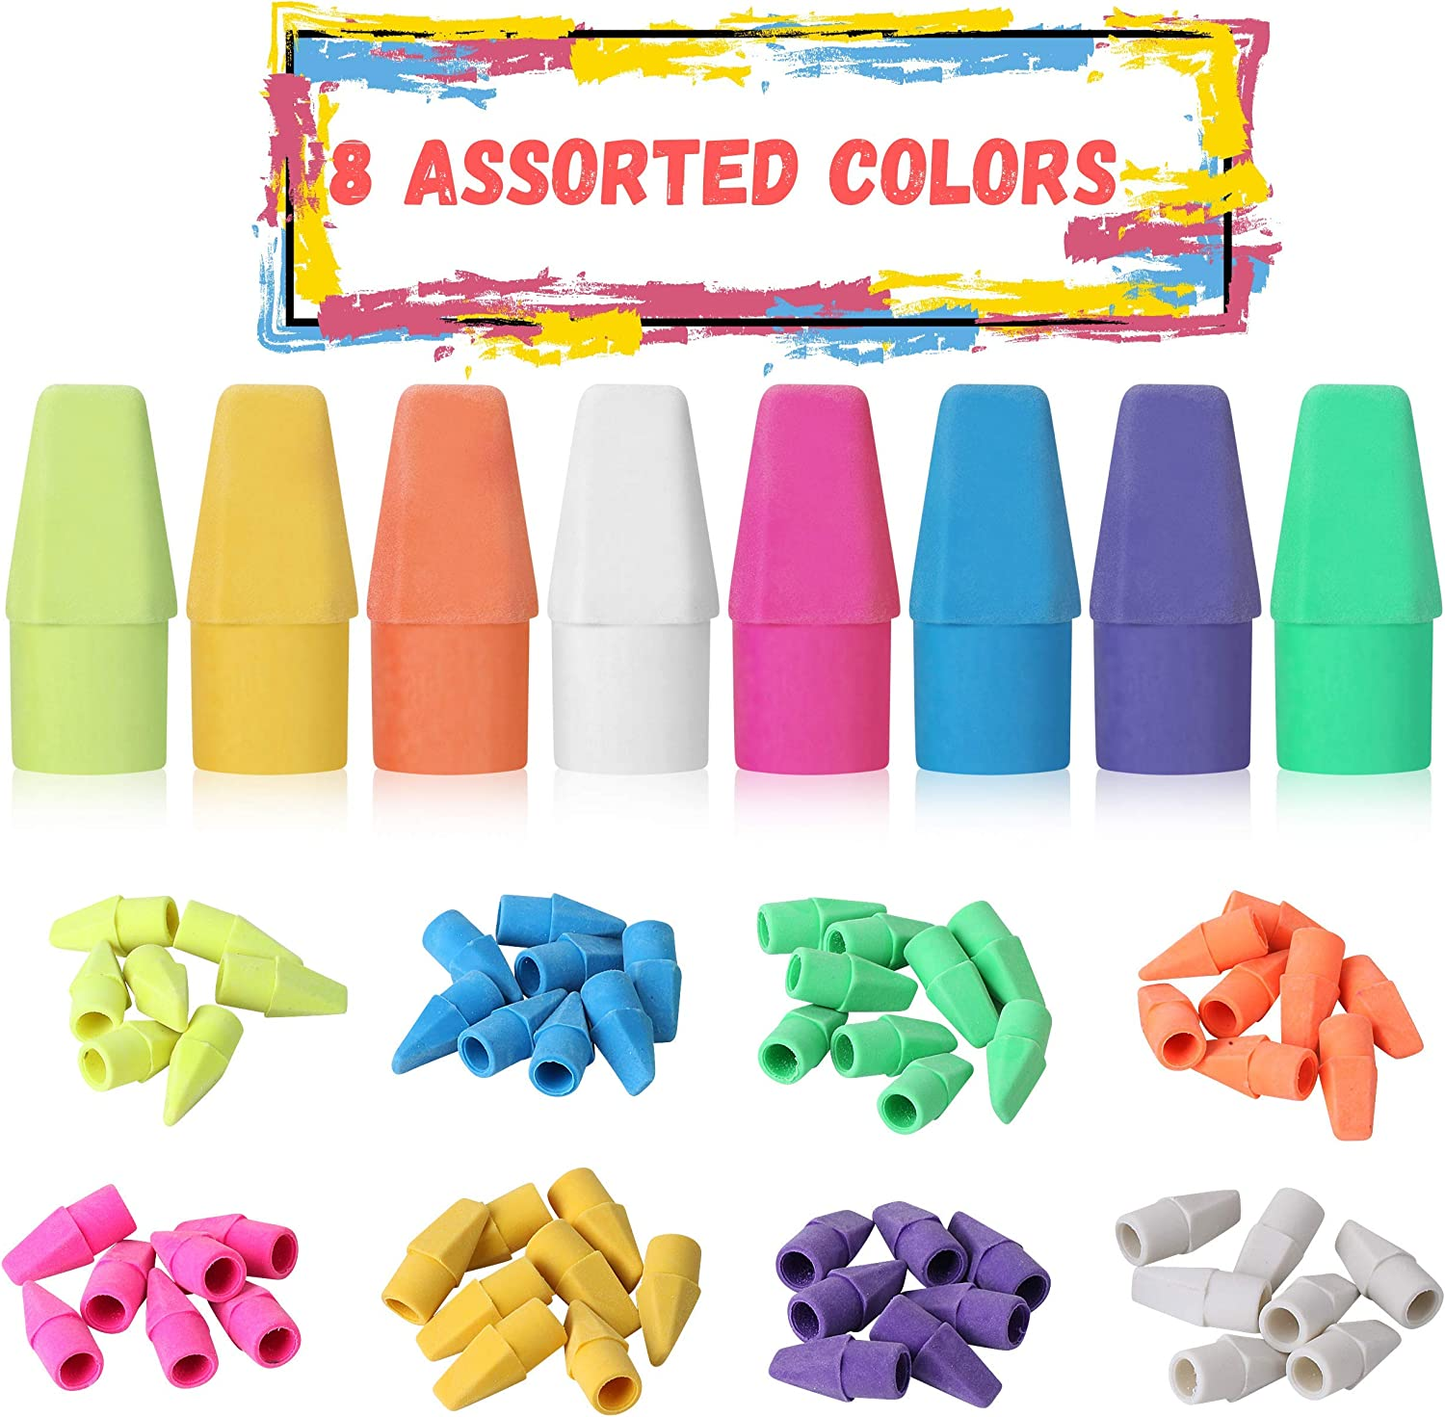 Mr. Pen- Pencil Erasers Set, 6Pc Pink Erasers and 60Pc Pencil Top Erasers, Pencil Eraser, Pencil Erasers Topper, Erasers for Pencils Top, Erasers for Kids, Pink Erasers, Cap Erasers, Eraser Tops